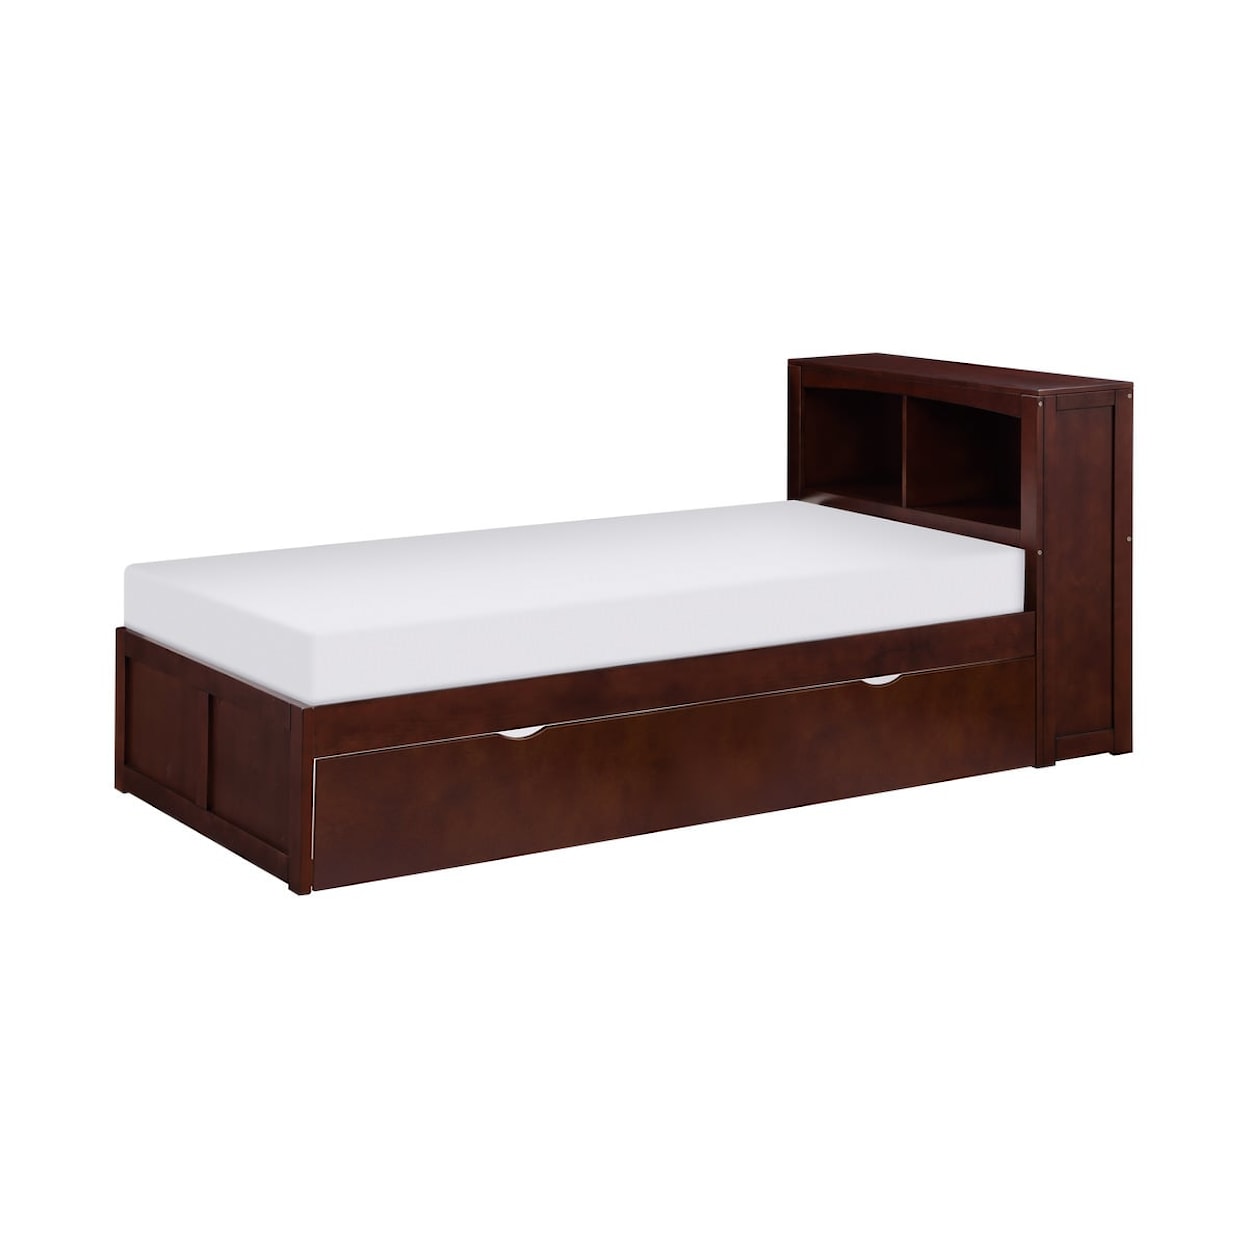 Homelegance Furniture Discovery Twin Bookcase Bed with Twin Trundle